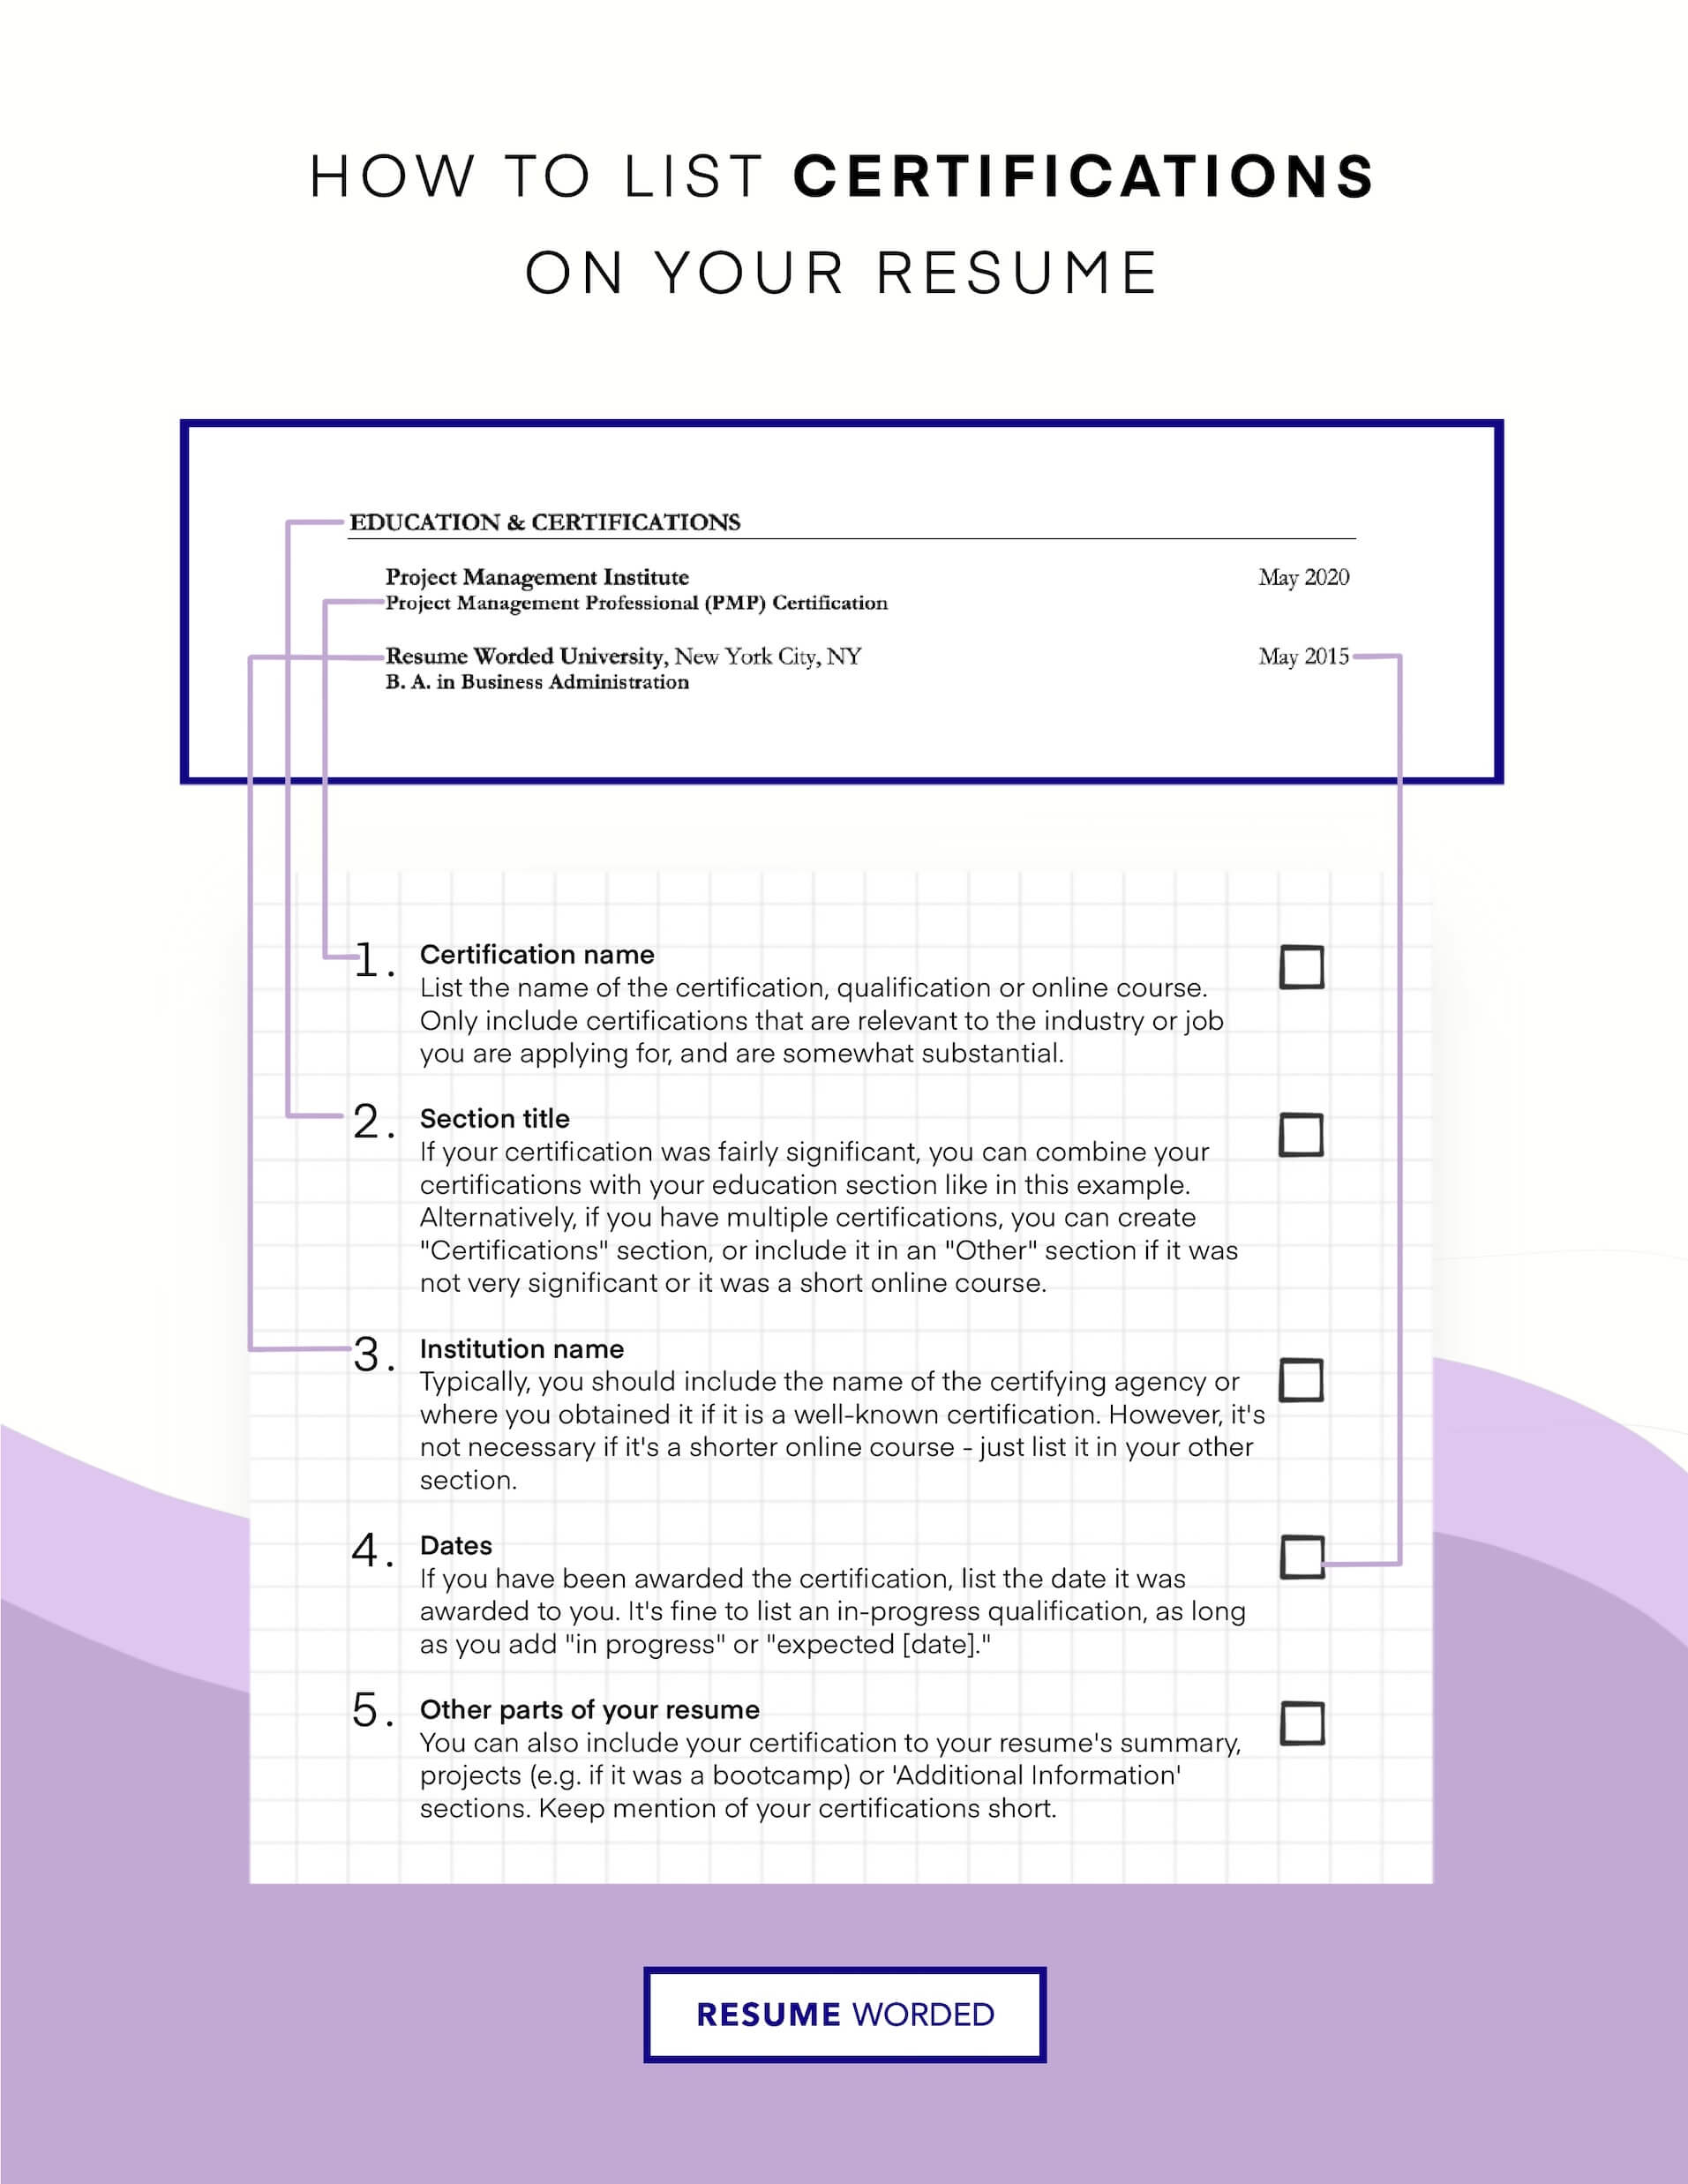 Highlight your technical skills and certifications - Sales Account Manager Resume